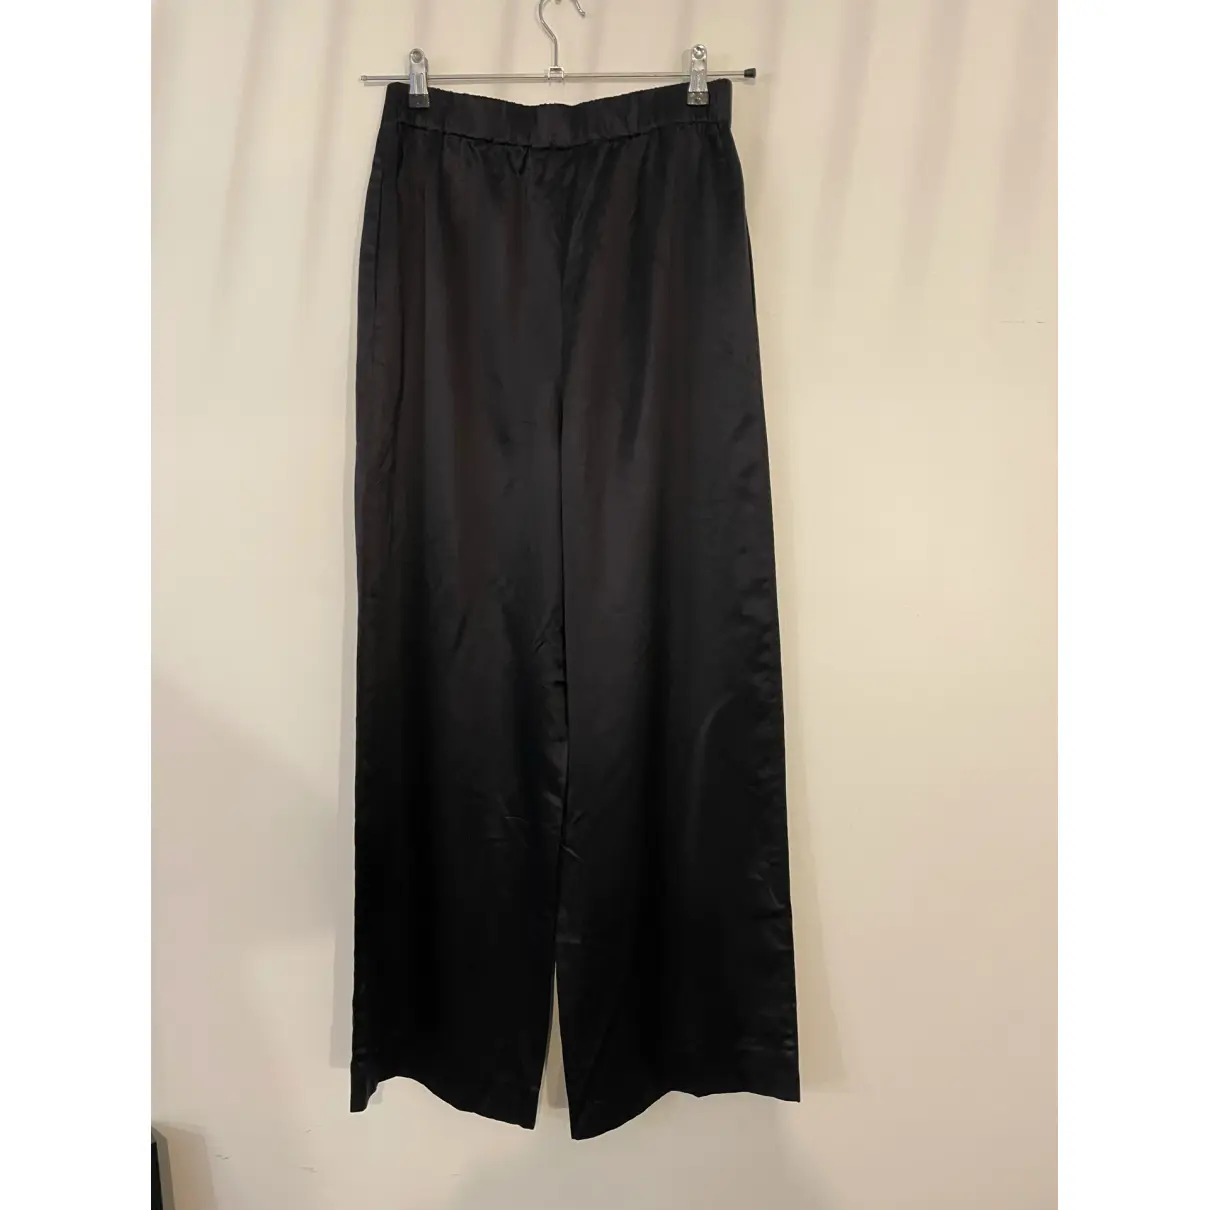 Buy Givenchy Silk large pants online